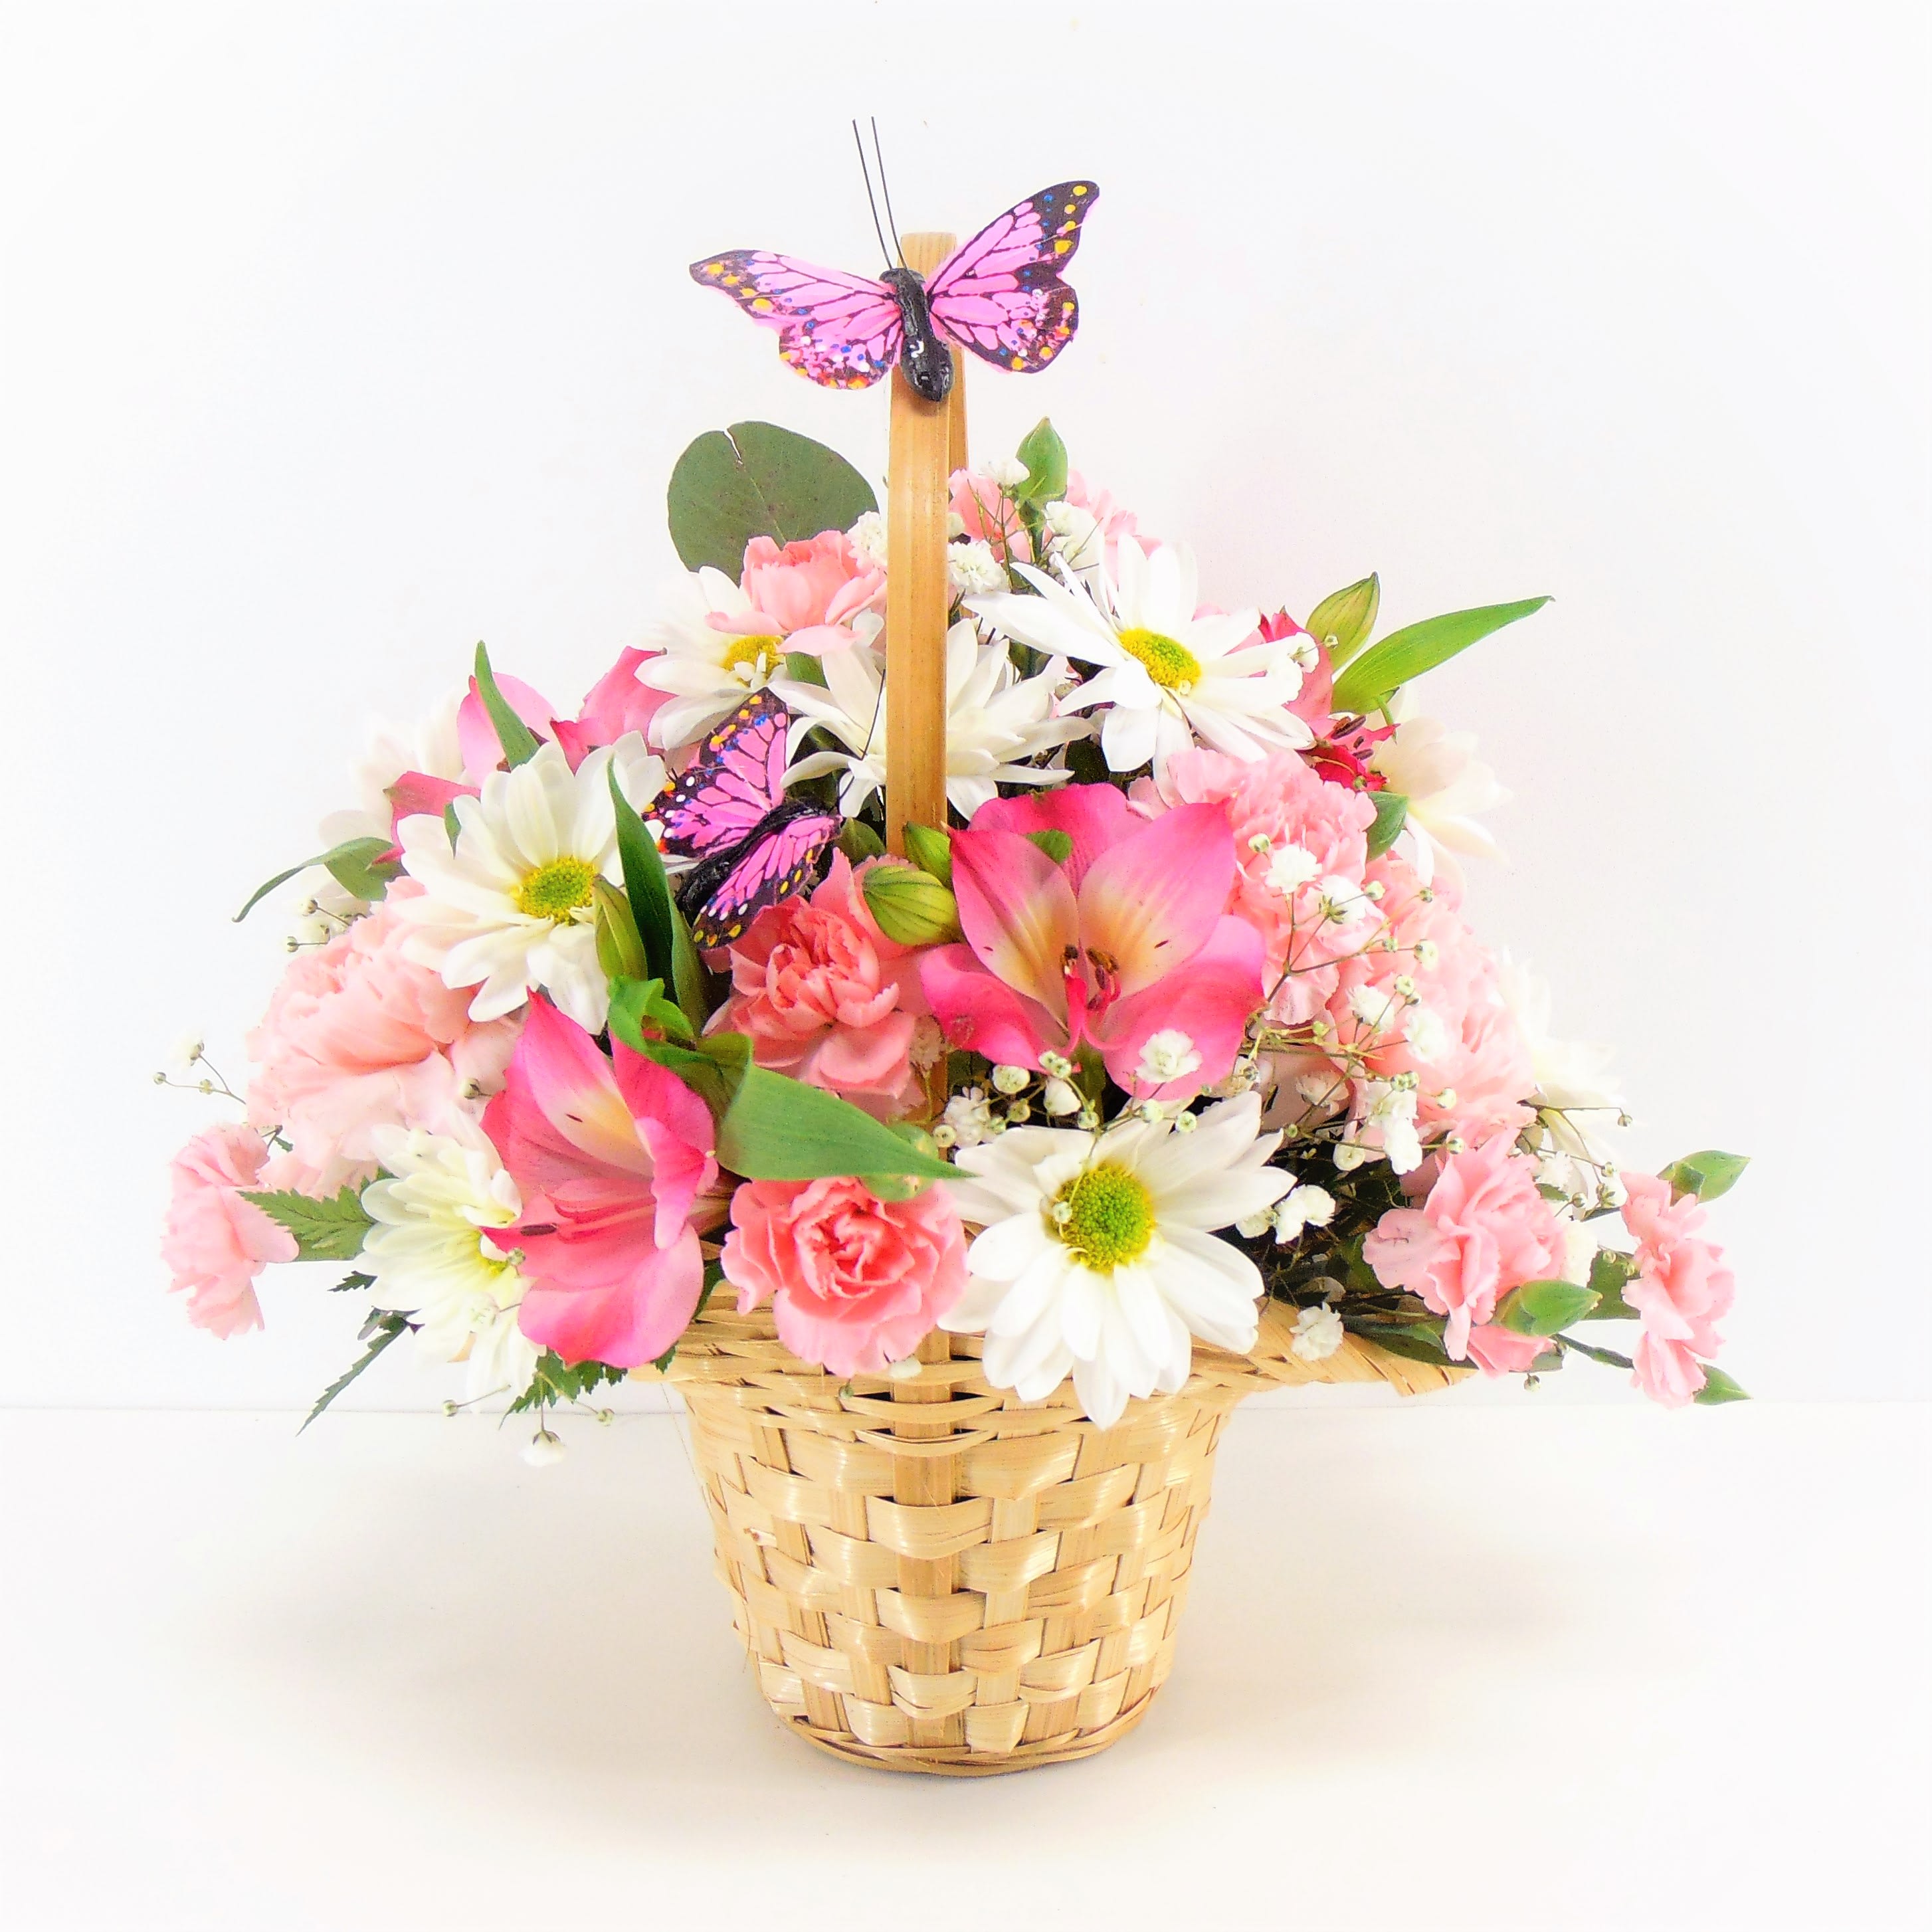 Butterflies &amp; Blooms - Pretty pink butterflies adorn this princess basket filled with white daisies, pink alstroemeria,  miniature carnations and baby's breath. Say Just Because! or Happy Mother's Day!  Perfect! The standard option is shown and is all-around style.